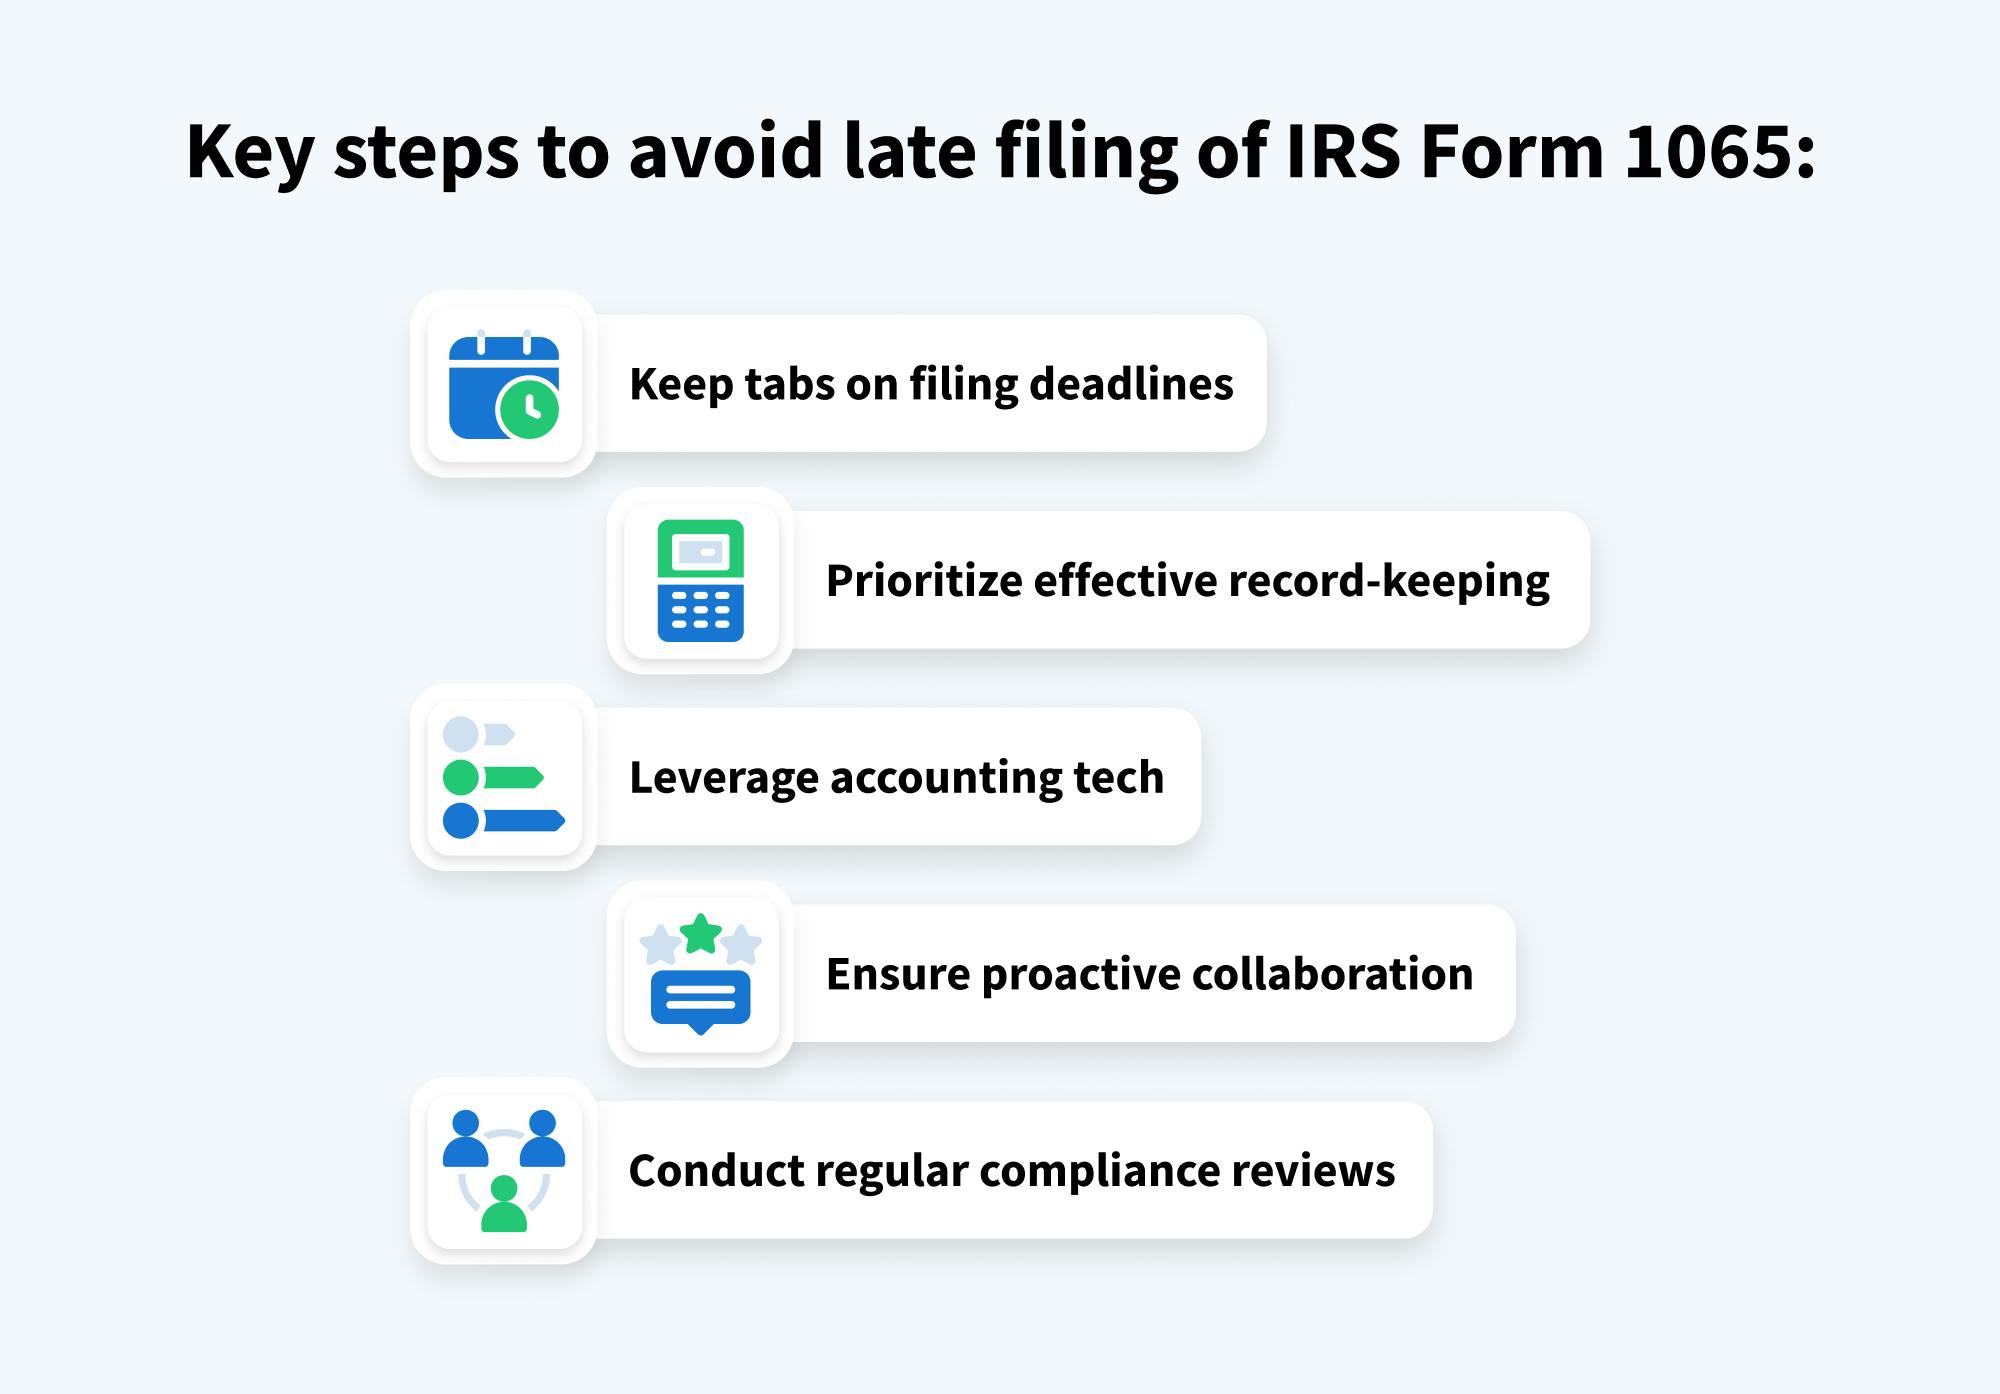 An infographic showing the key steps to take to avoid late filing of IRS Form 1065.